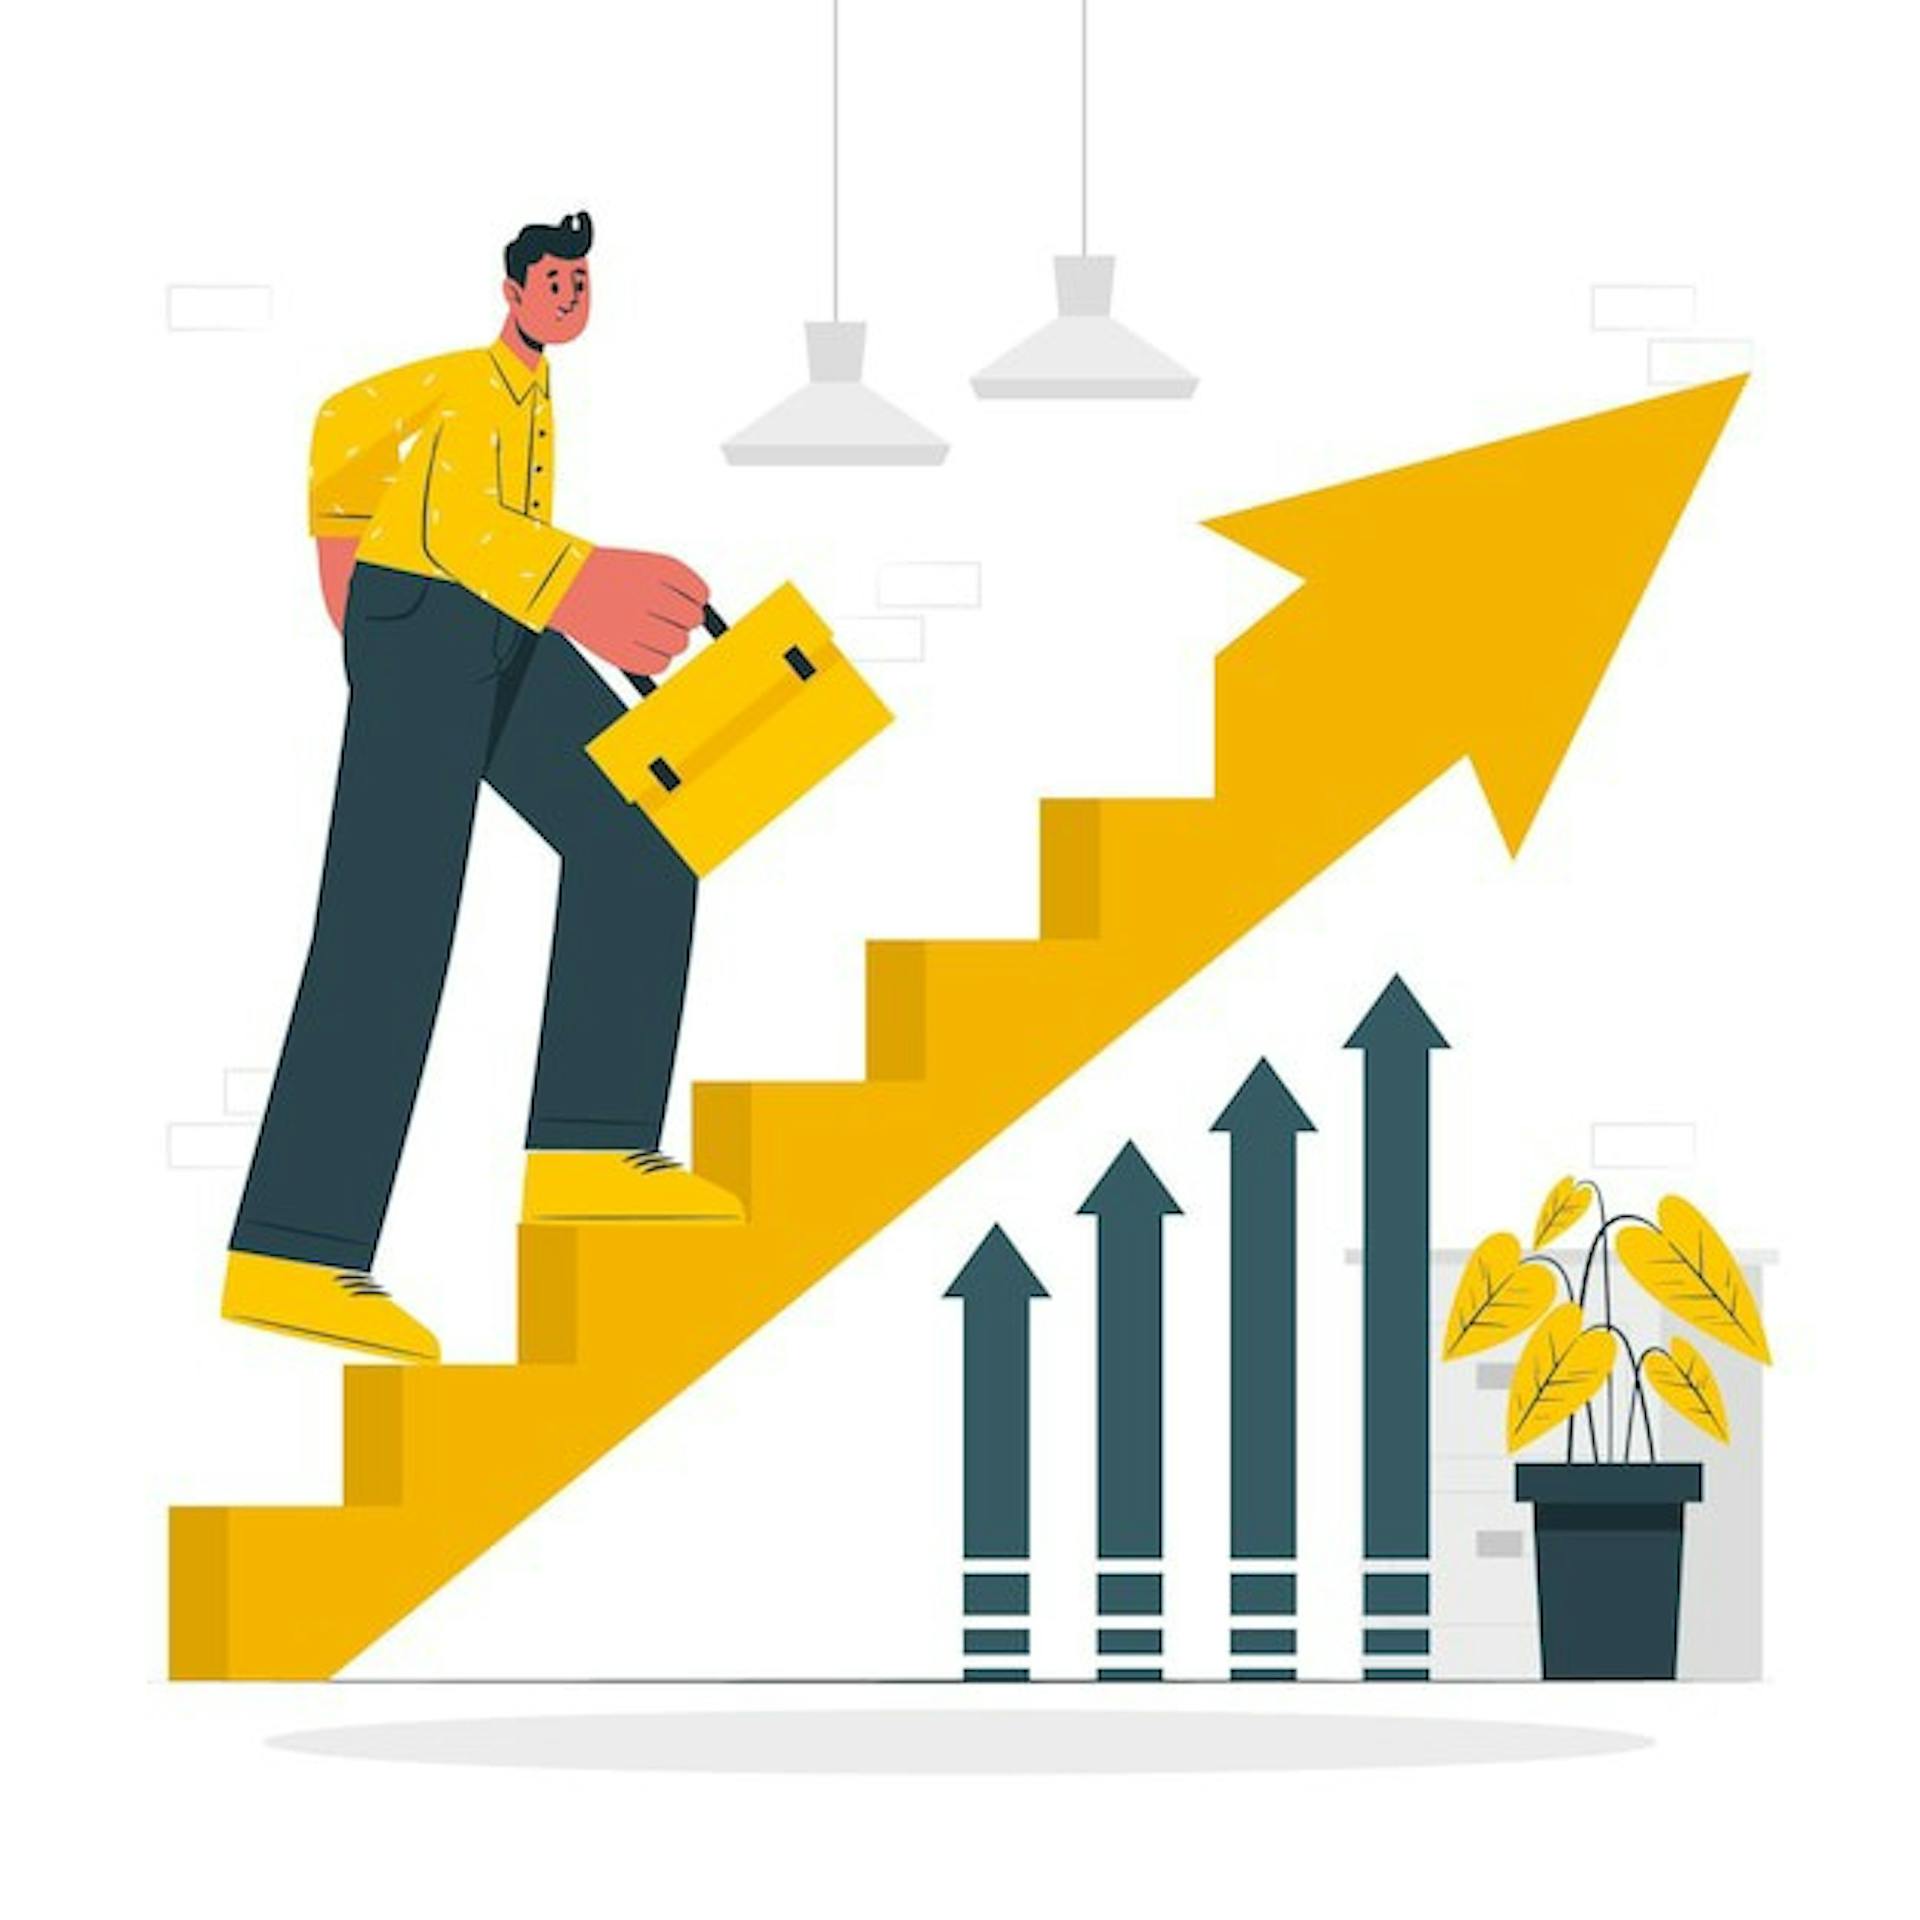 https://www.freepik.com/free-vector/going-up-concept-illustration_10812707.htm#query=business%20growth&position=33&from_view=search&track=ais